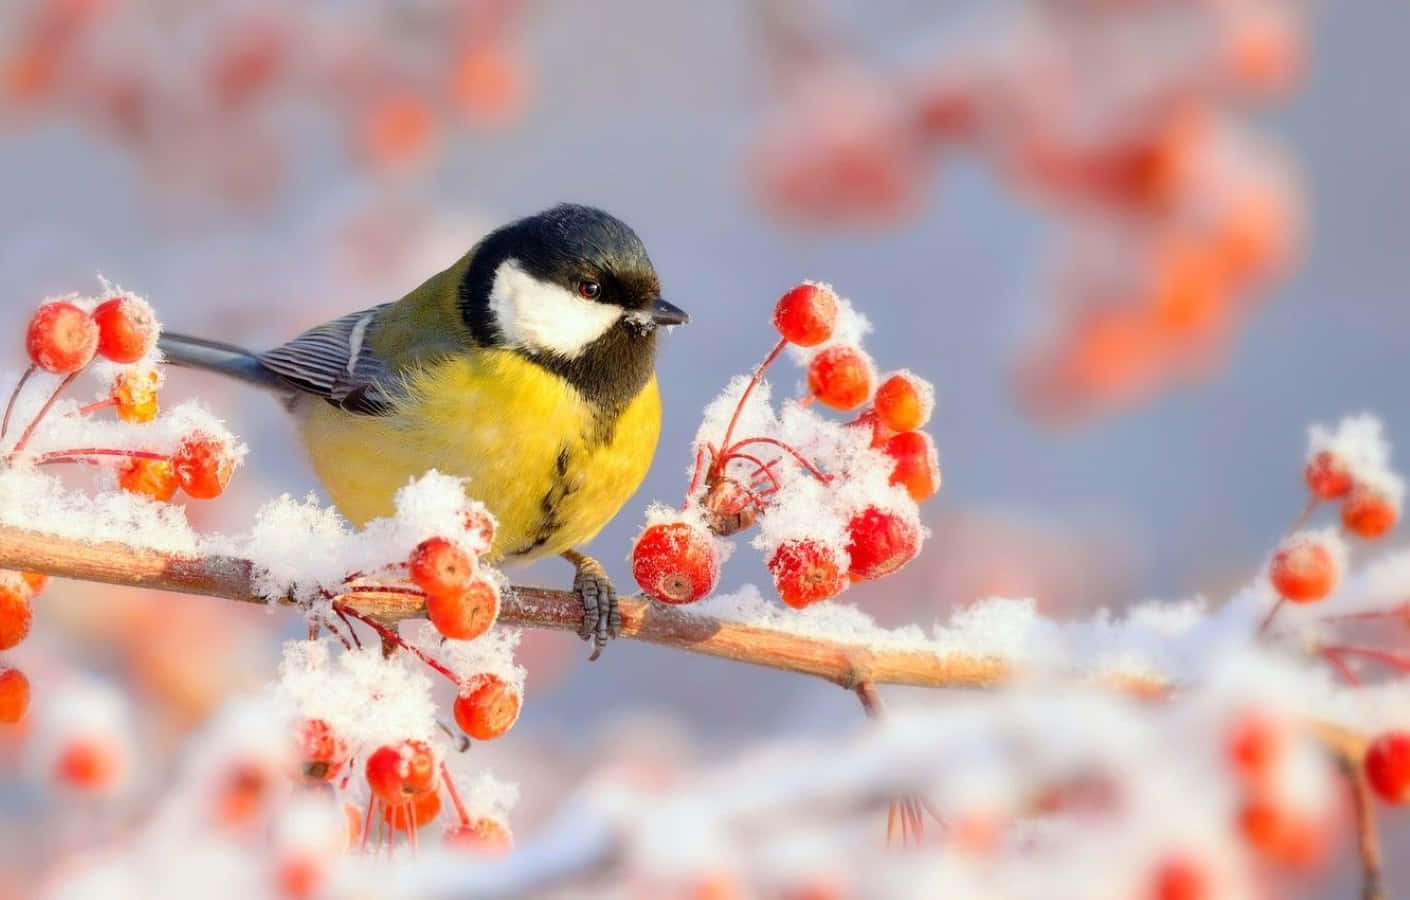 Vibrant Winter Berries on a Snowy Branch Wallpaper